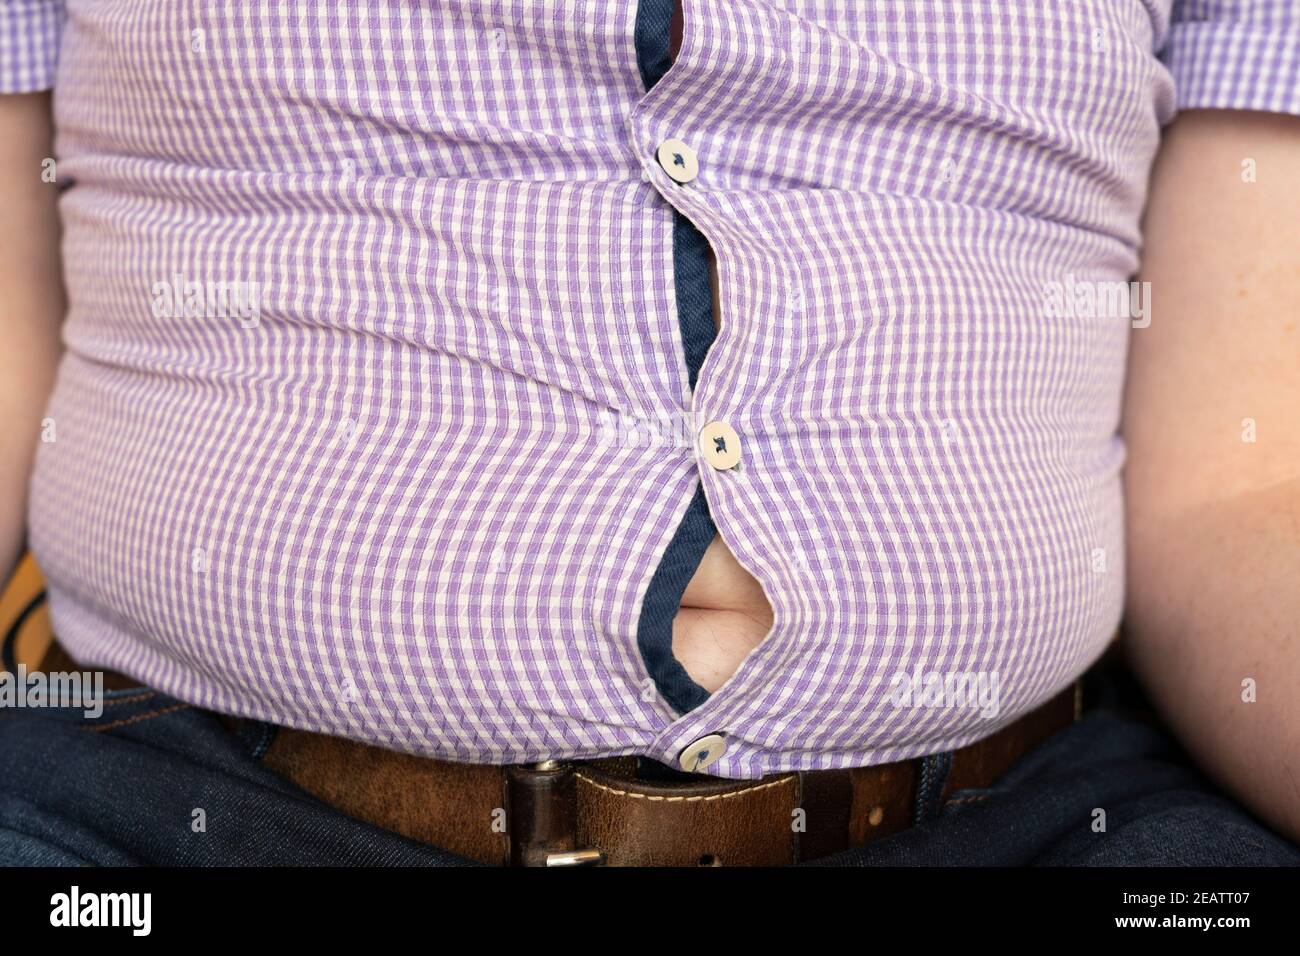 An overweight man with a shirt stretched over his large tummy. Theme: beer belly, overweight, covid-19 lockdown, lack of exercise, sedentary lifestyle Stock Photo